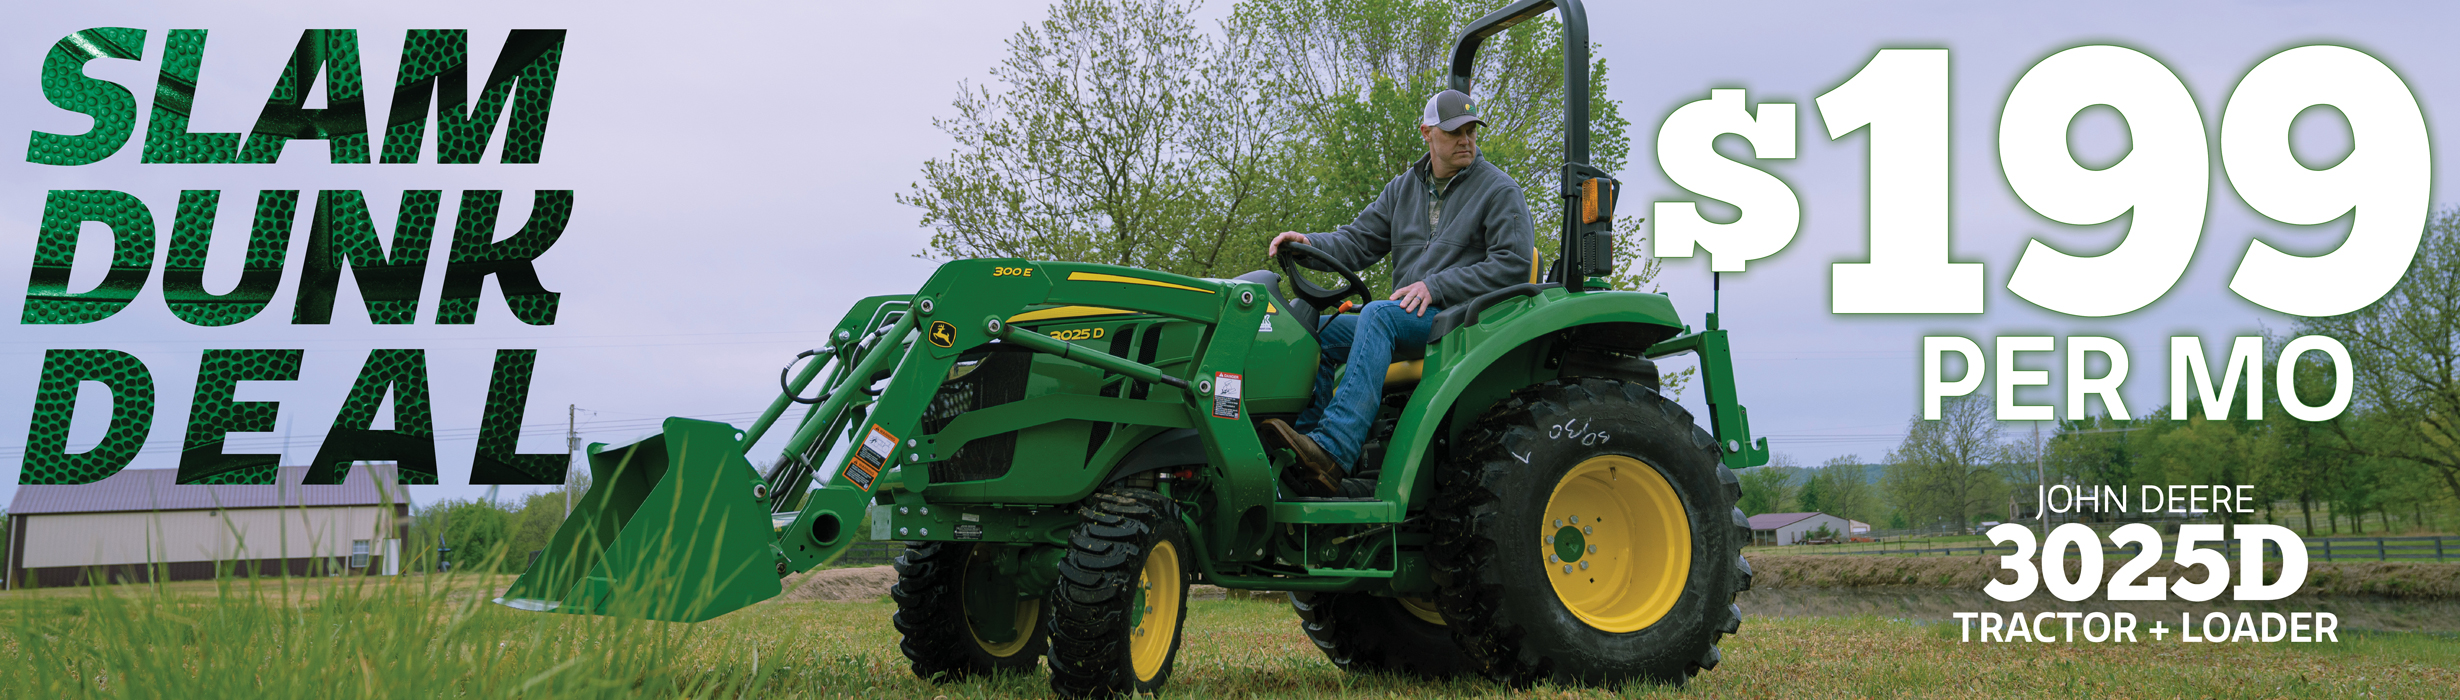 Get the 3025D Tractor + Loader for just $199/mo